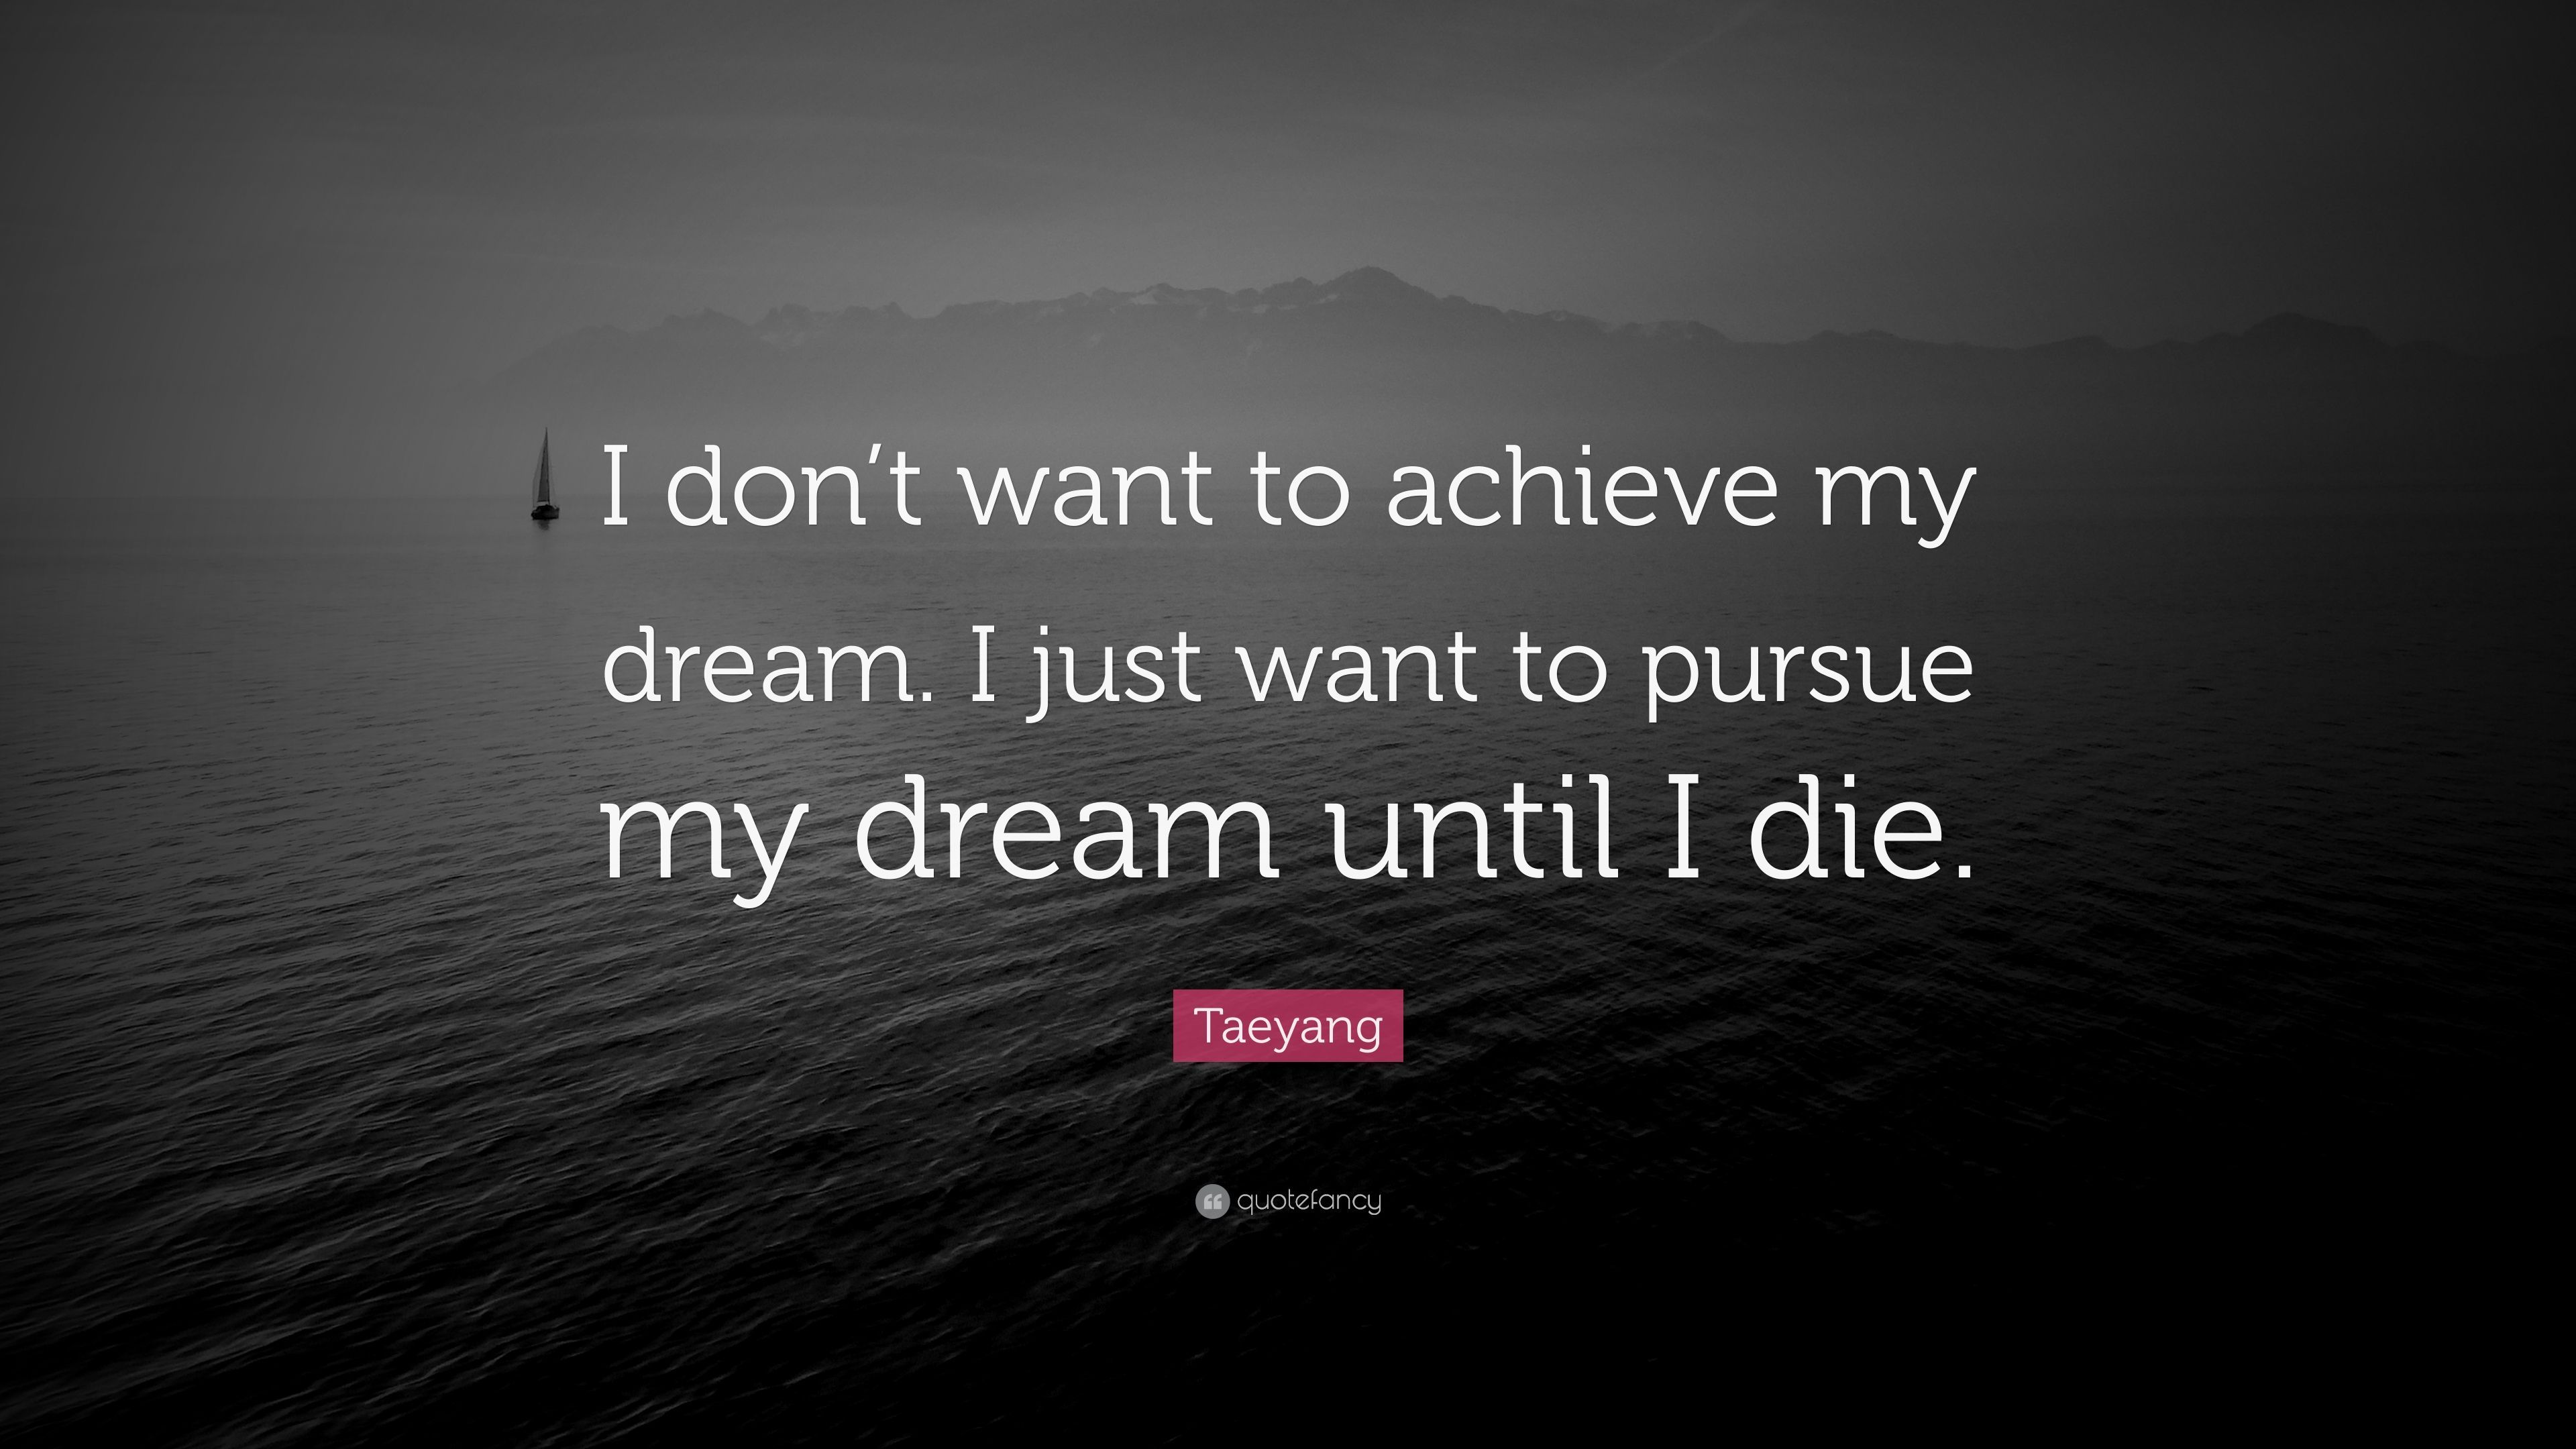 Taeyang Quote: “I don't want to achieve my dream. I just want to